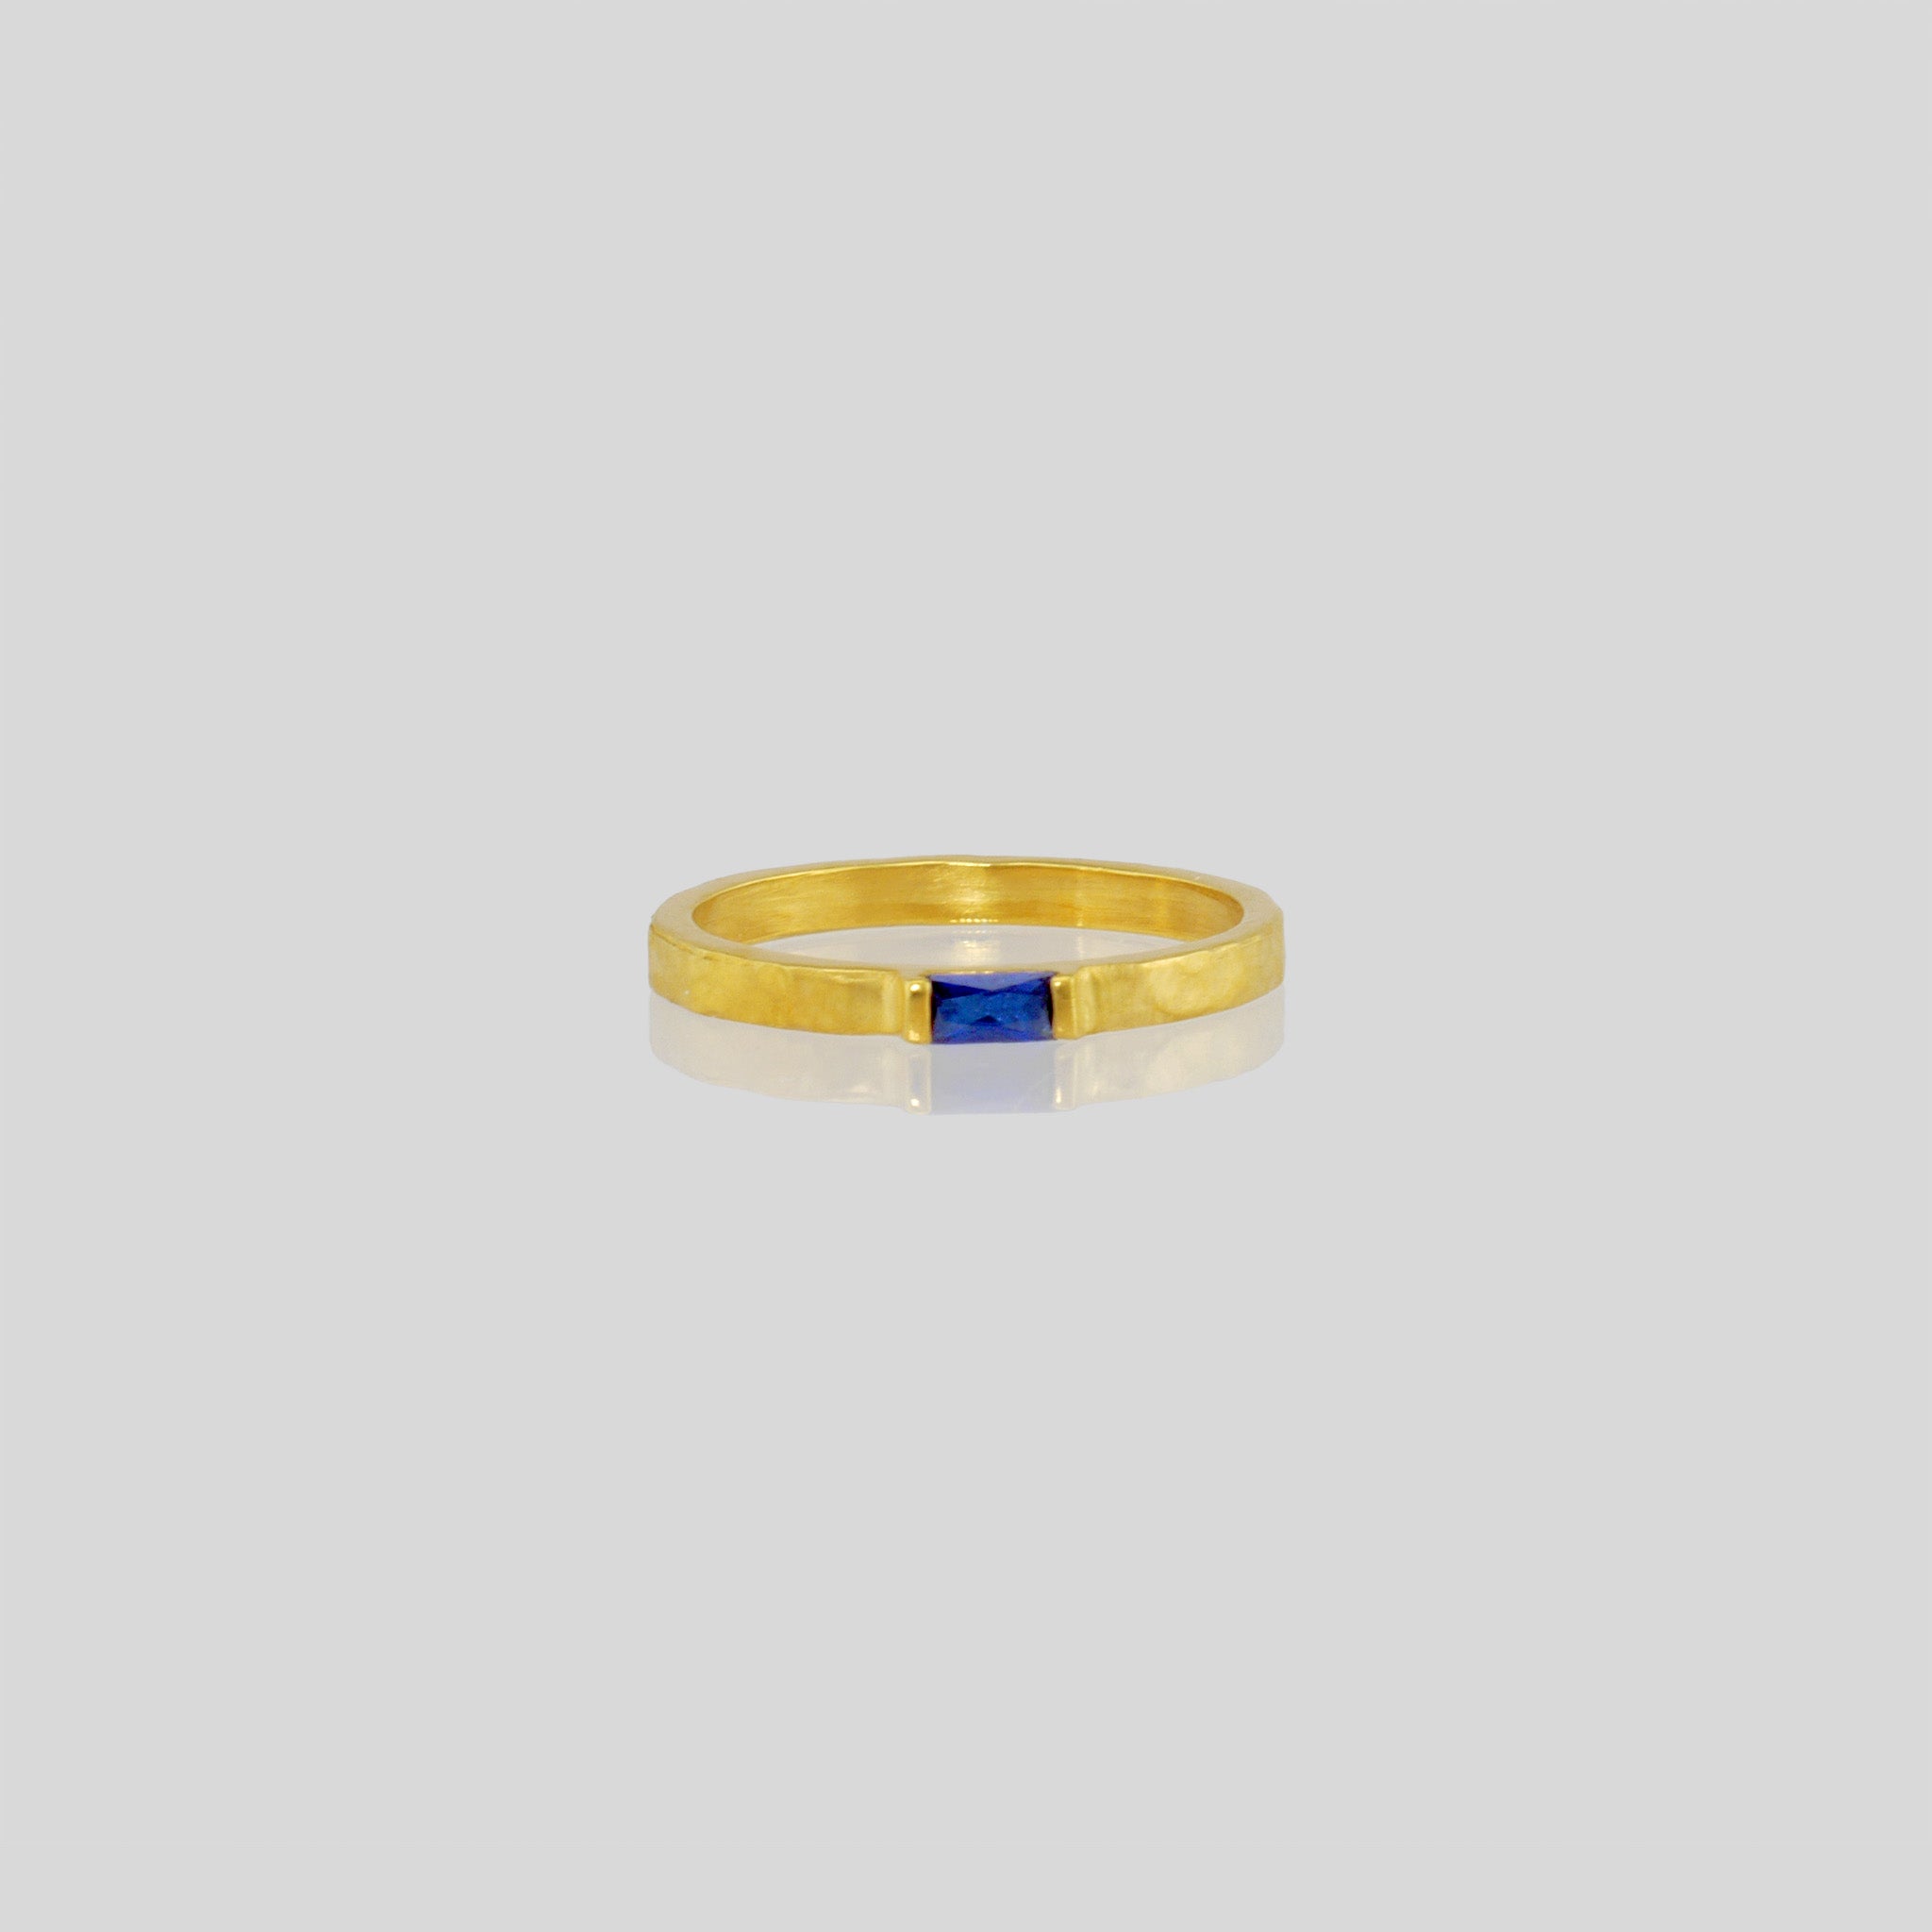 Handmade gold ring with hand-hammered surface and baguette Sapphire accent. Timeless elegance in Yellow gold, a perfect addition to any ensemble.